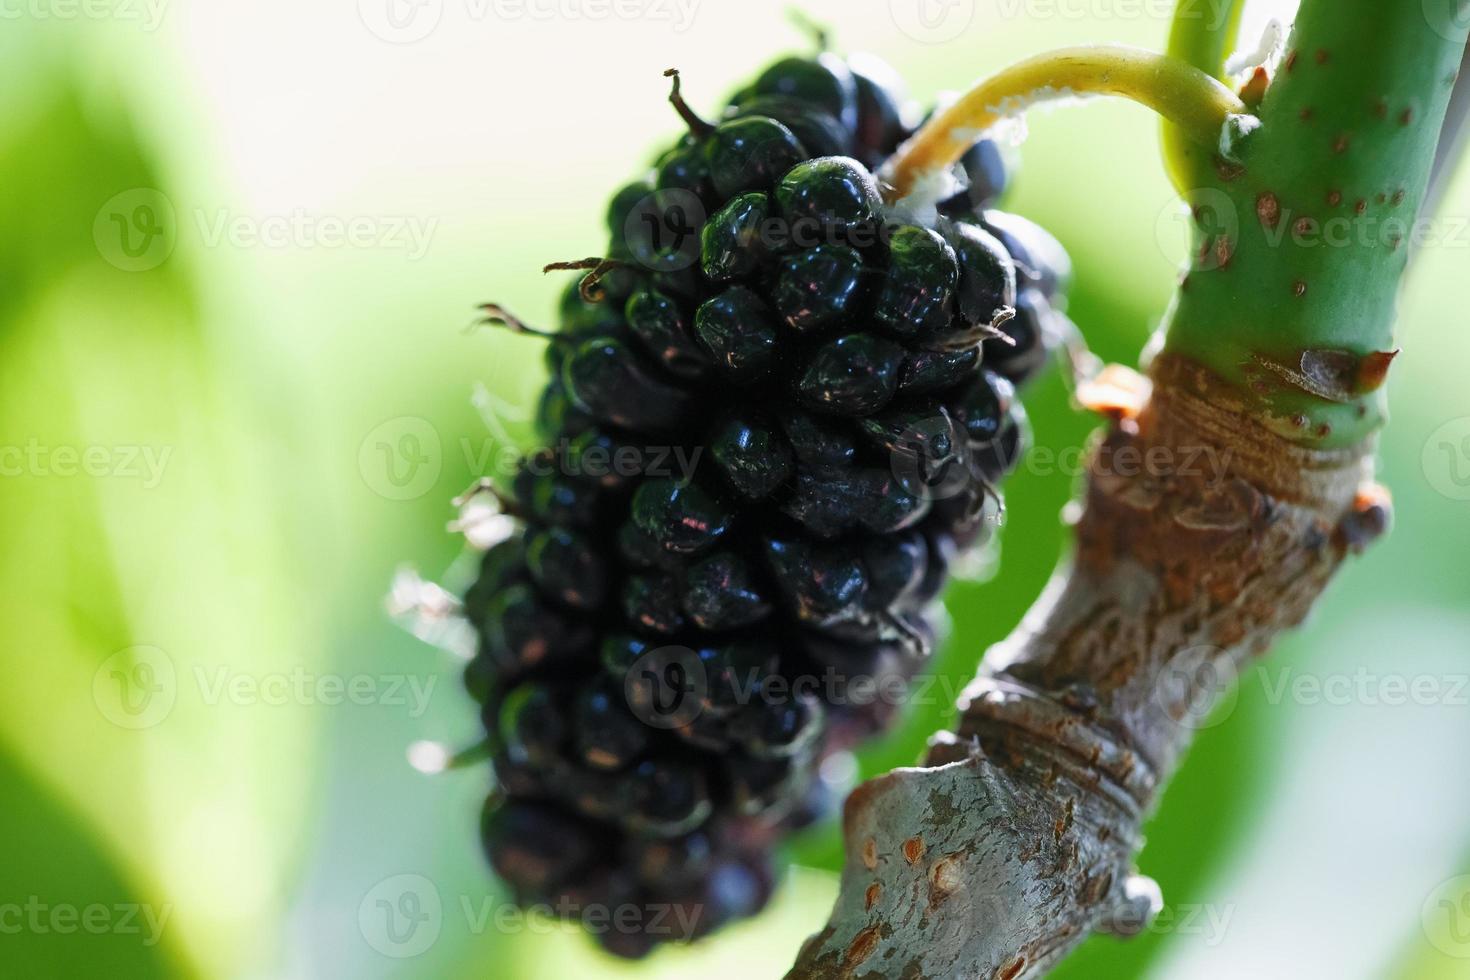 Ripe and fresh fruits of black mulberry ripened on a tree branch. Healthy food of juicy mulberry fruit photo